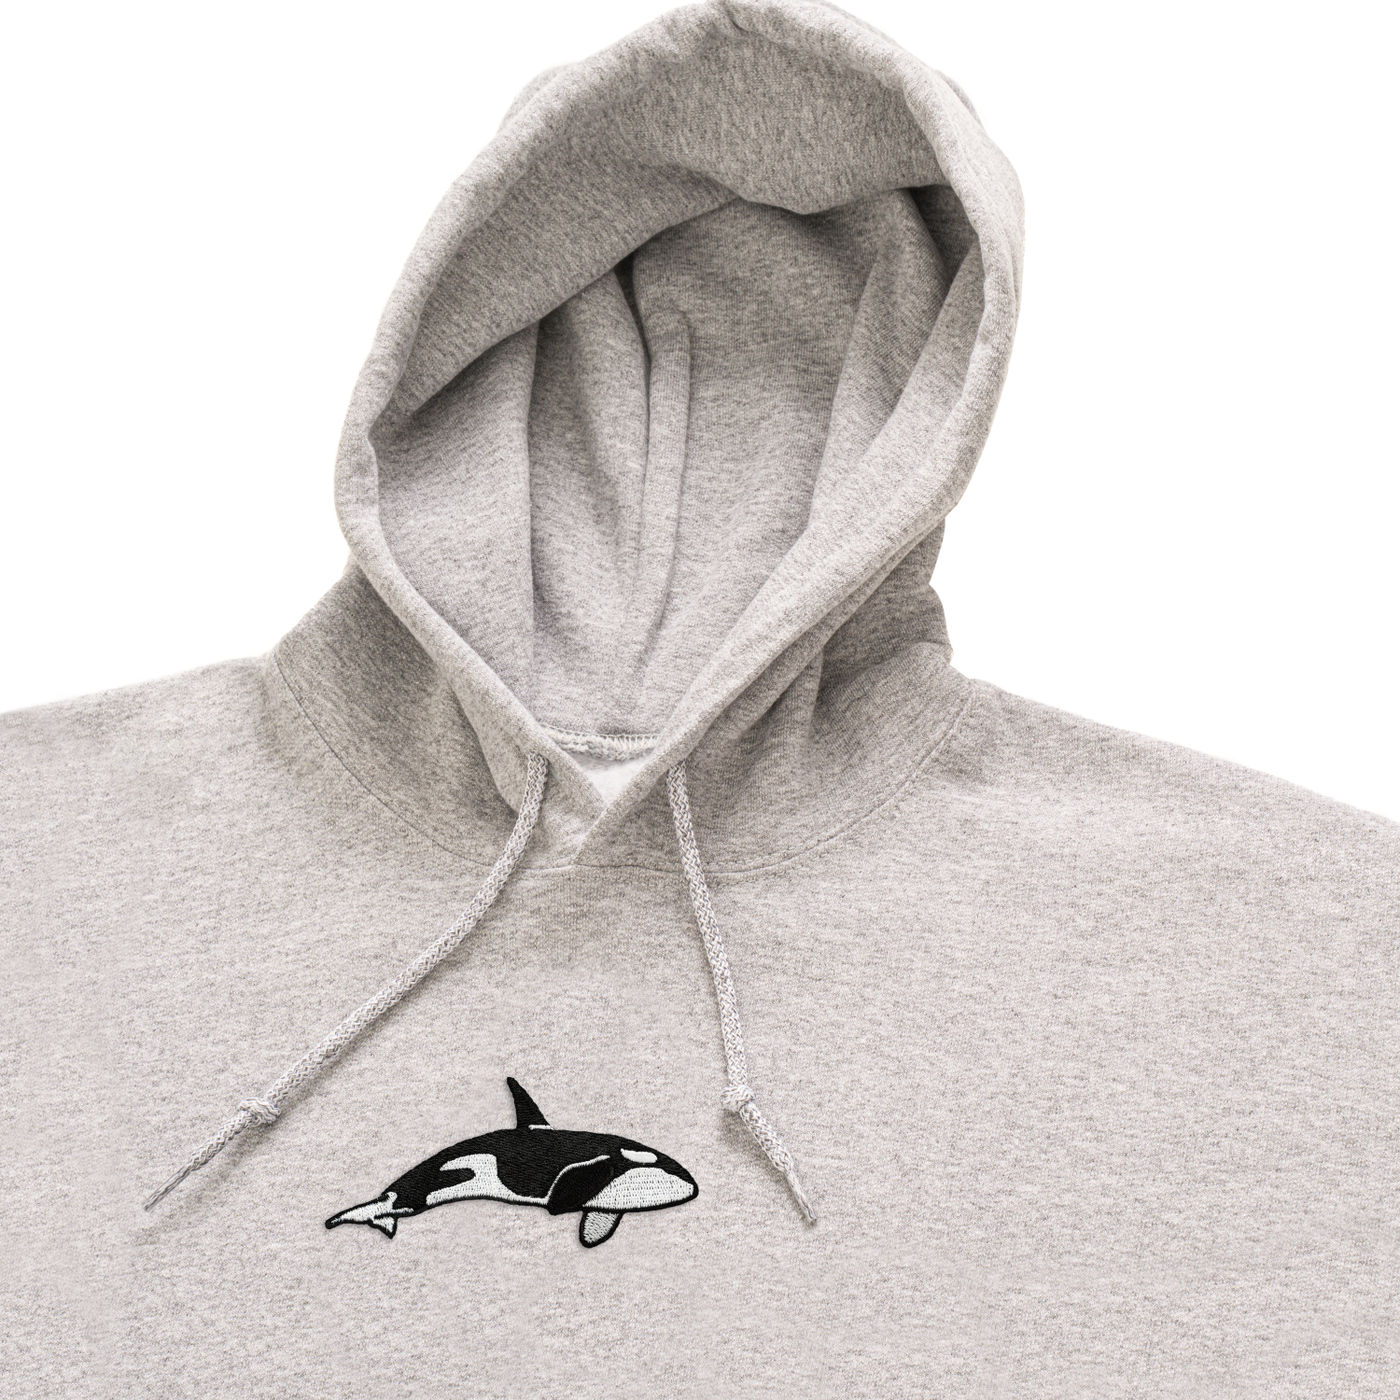 Bobby's Planet Men's Embroidered Orca Hoodie from Seven Seas Fish Animals Collection in Sport Grey Color#color_sport-grey